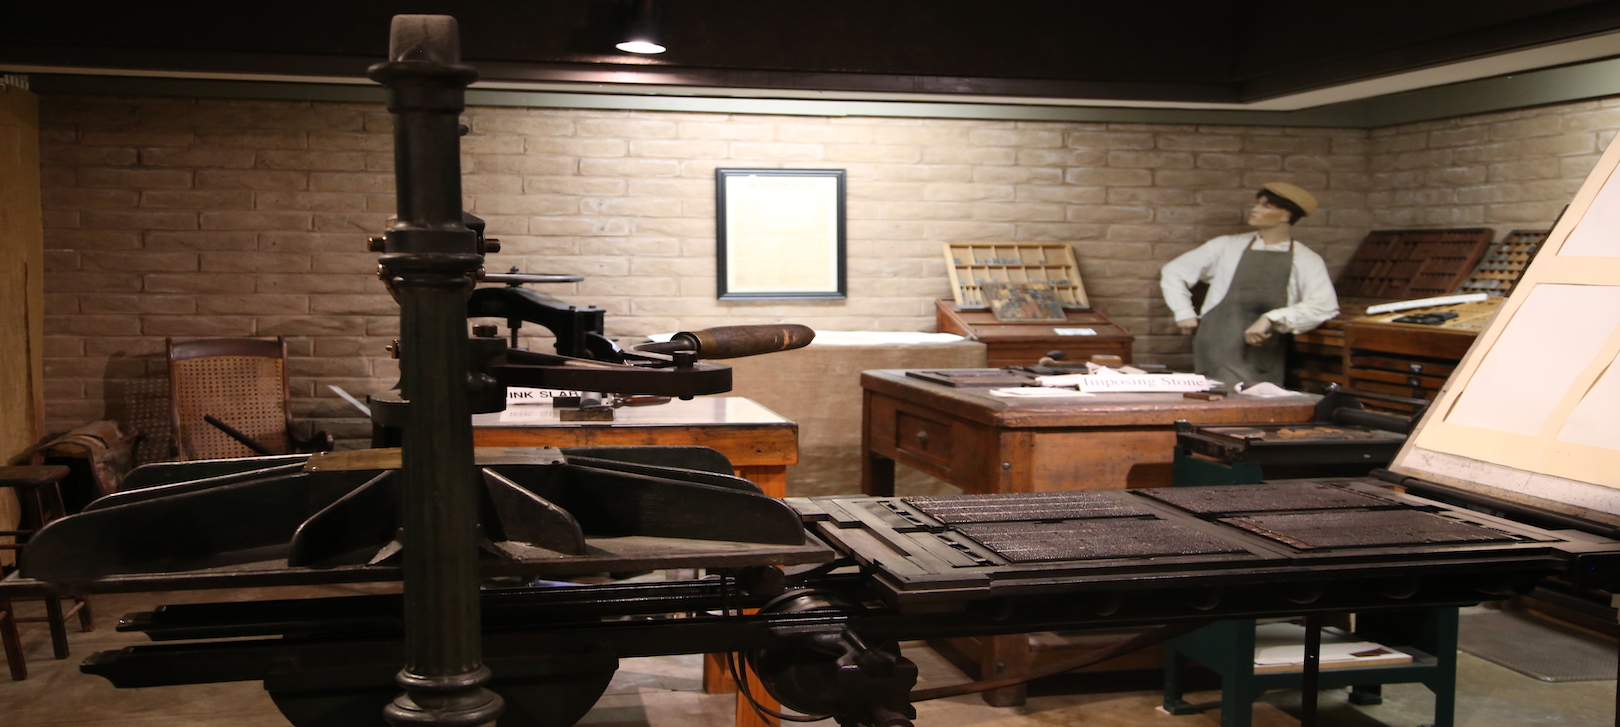 A view of the museum display of Arizona's first printing press inside the Tubac Presidio State Historic Park